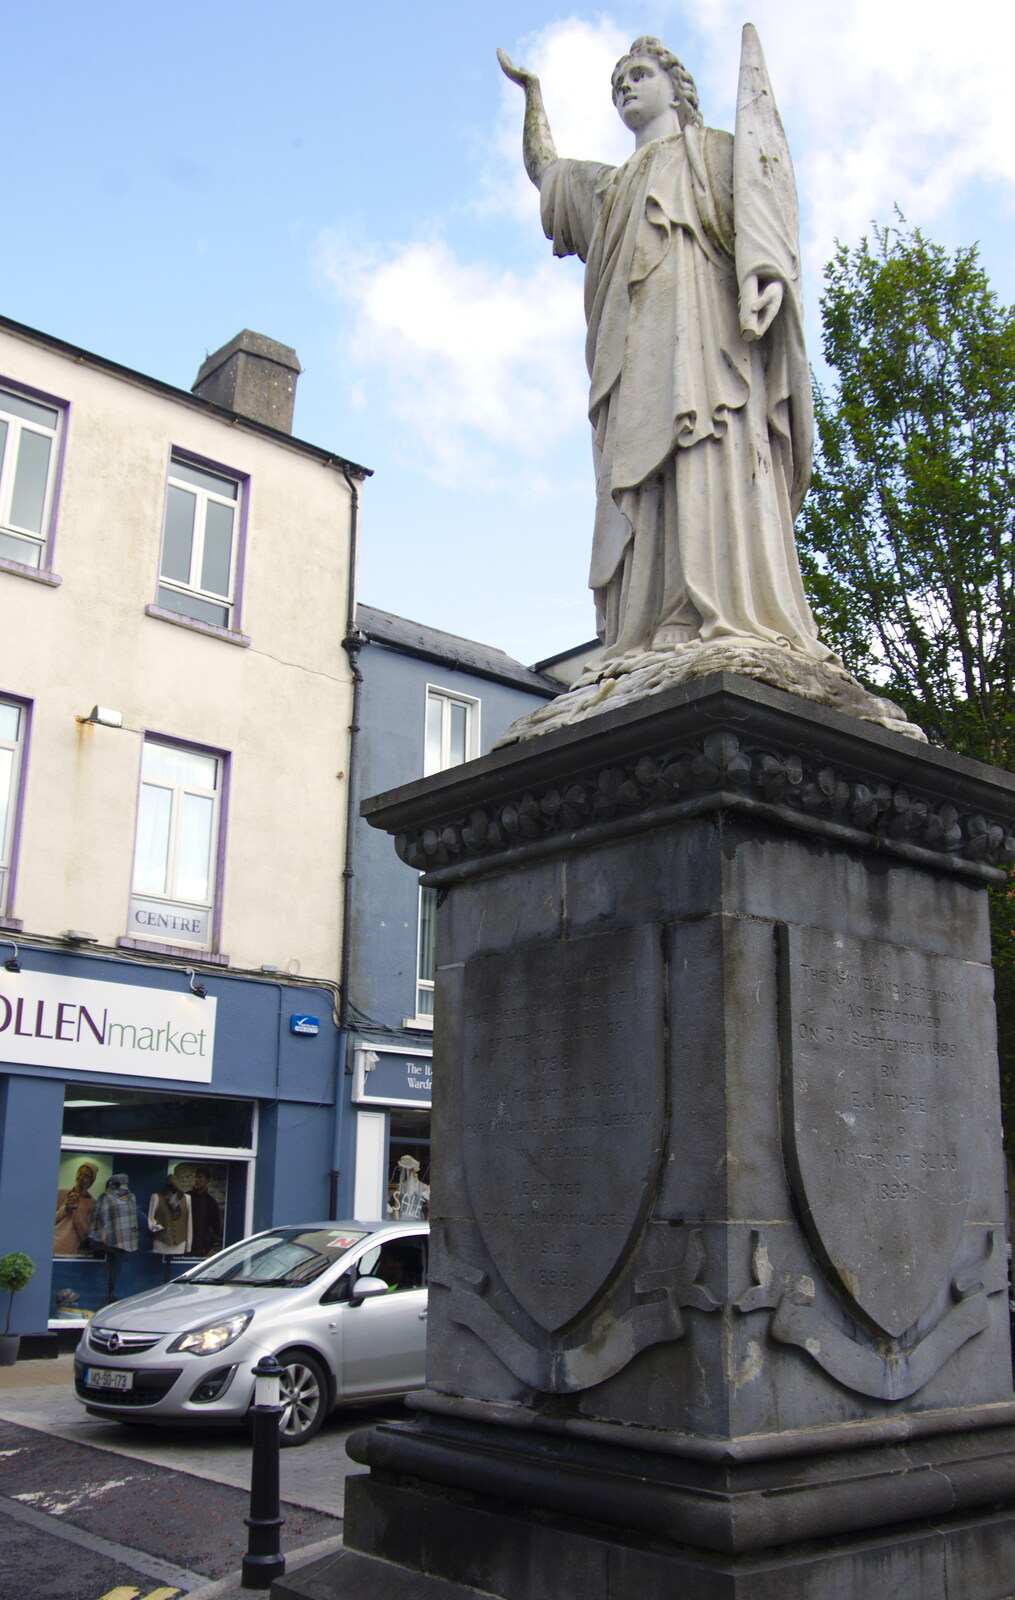 A weeping angel from Florence Court and a Postcard from Sligo, Fermanagh and Sligo, Ireland - 21st August 2019